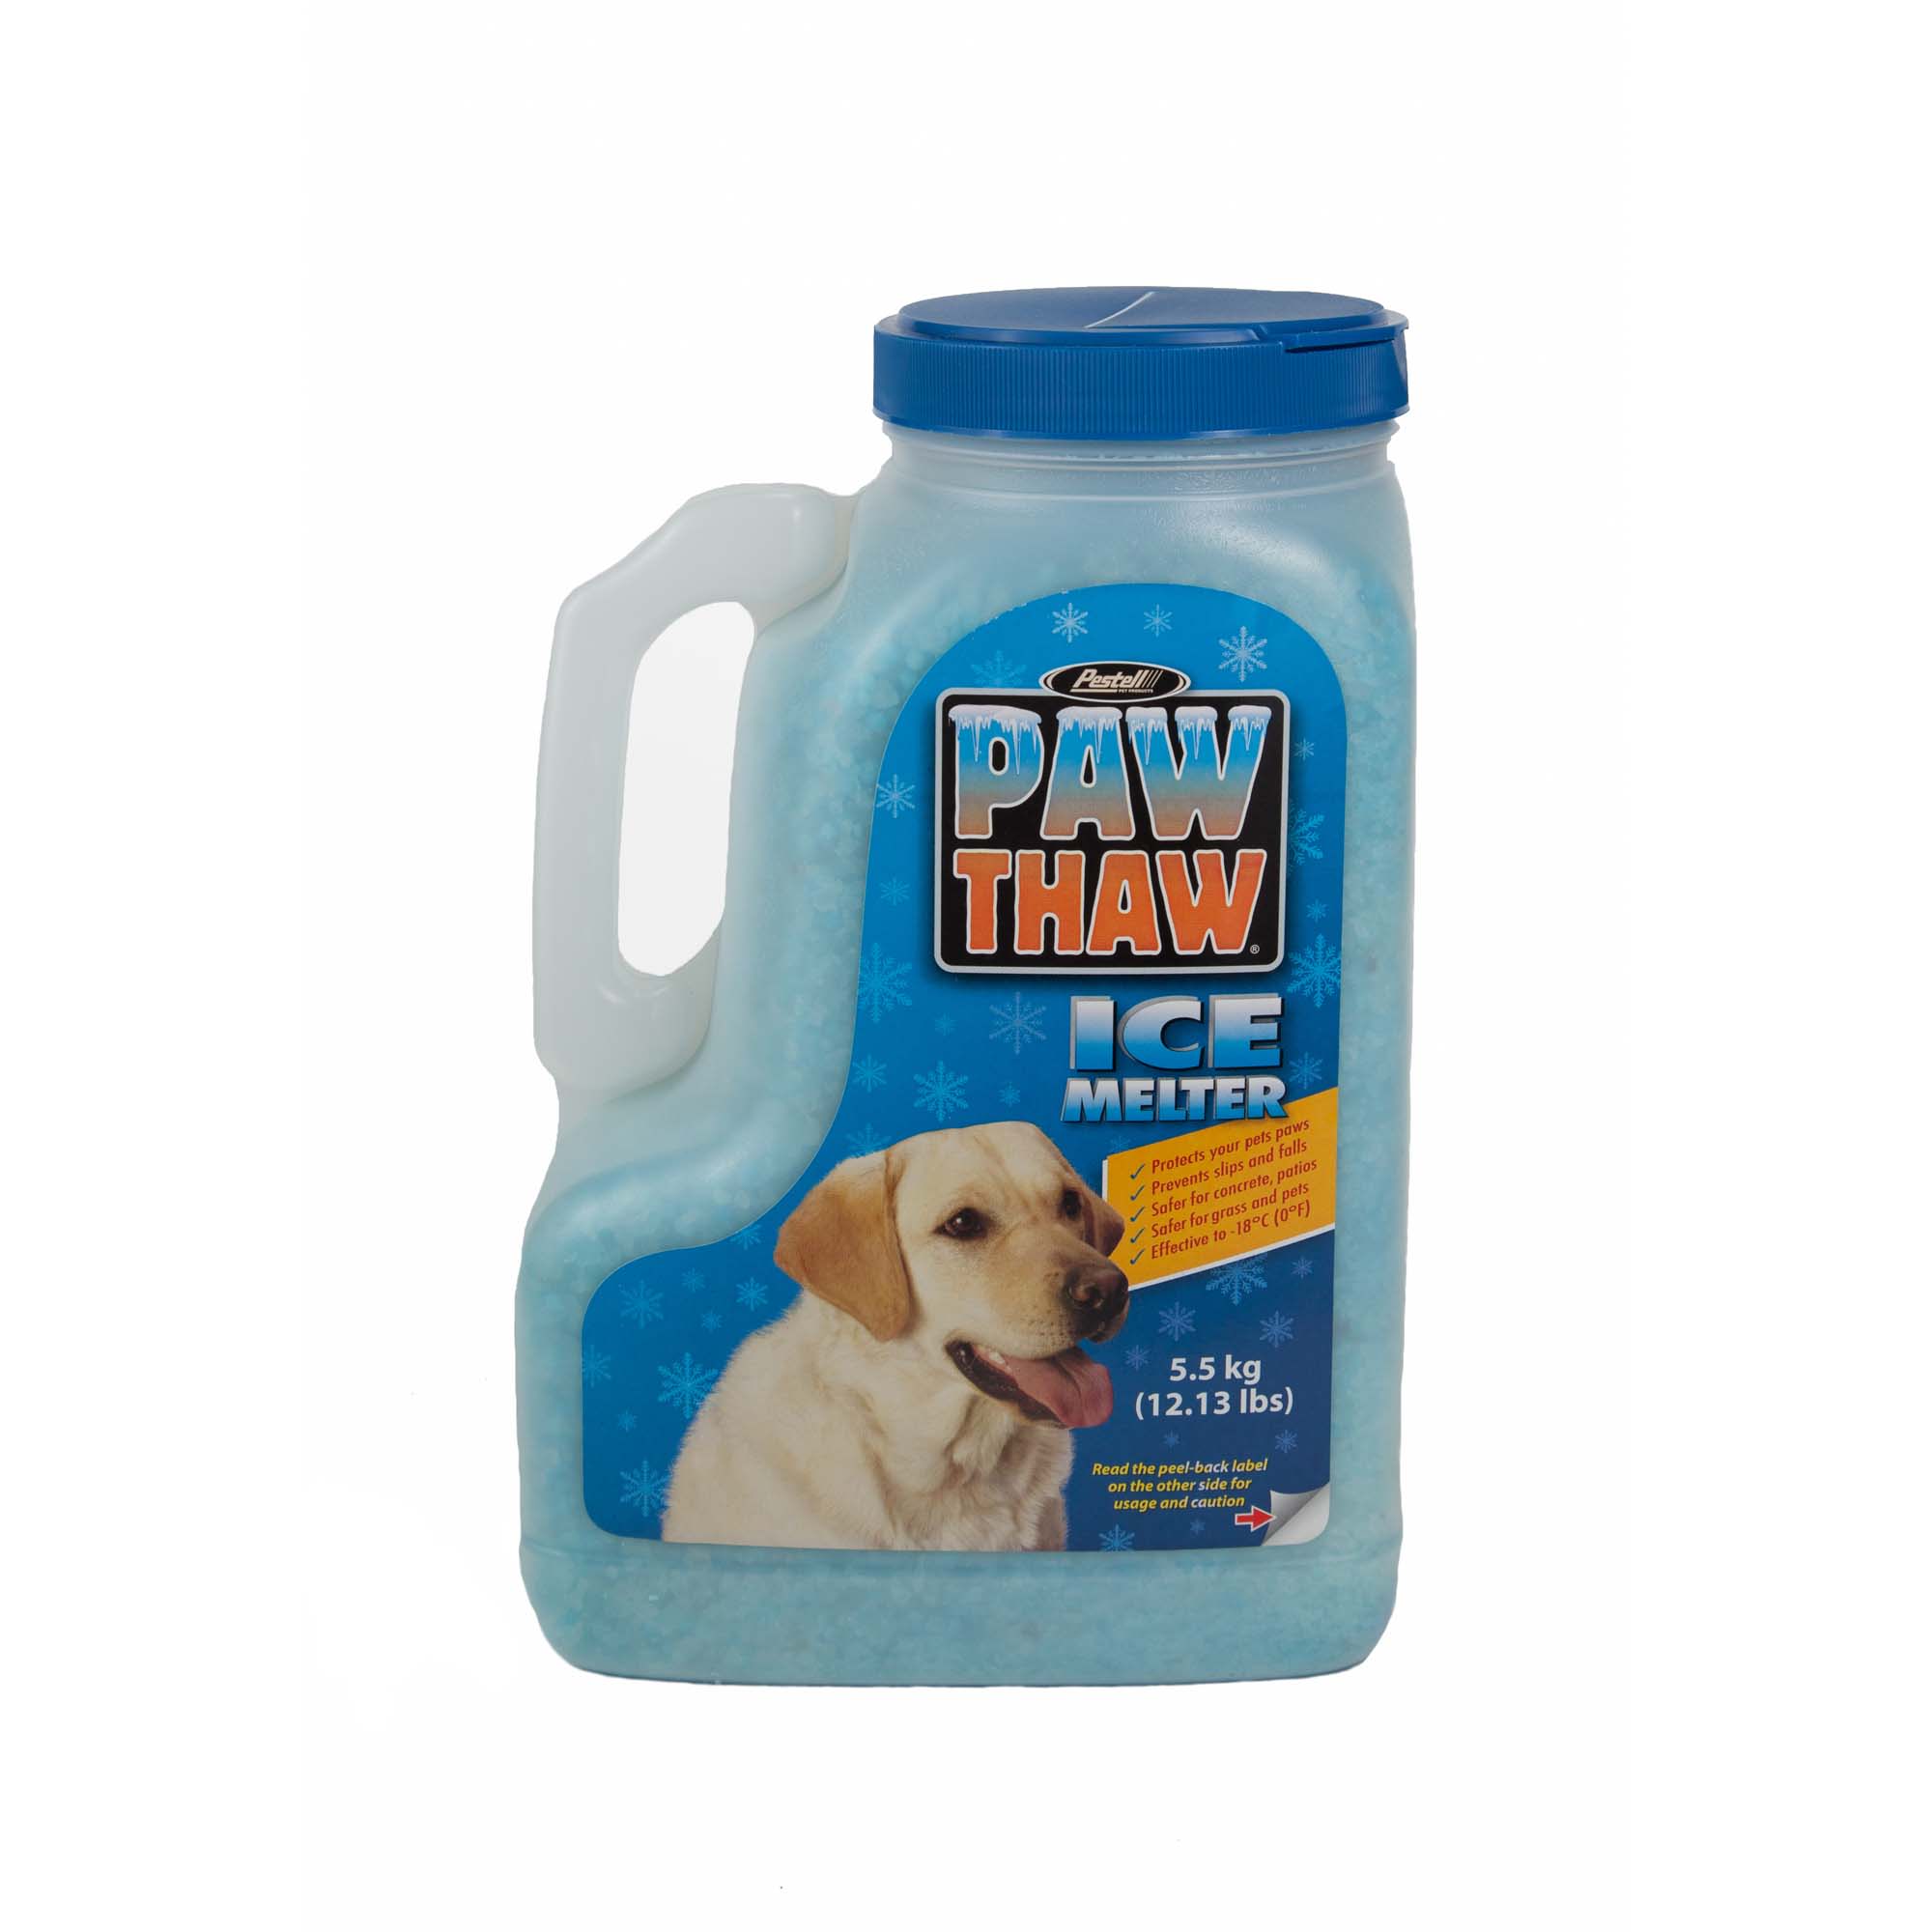 Pestell Paw Thaw Pet Friendly Ice Melter Jug, 12 Pounds